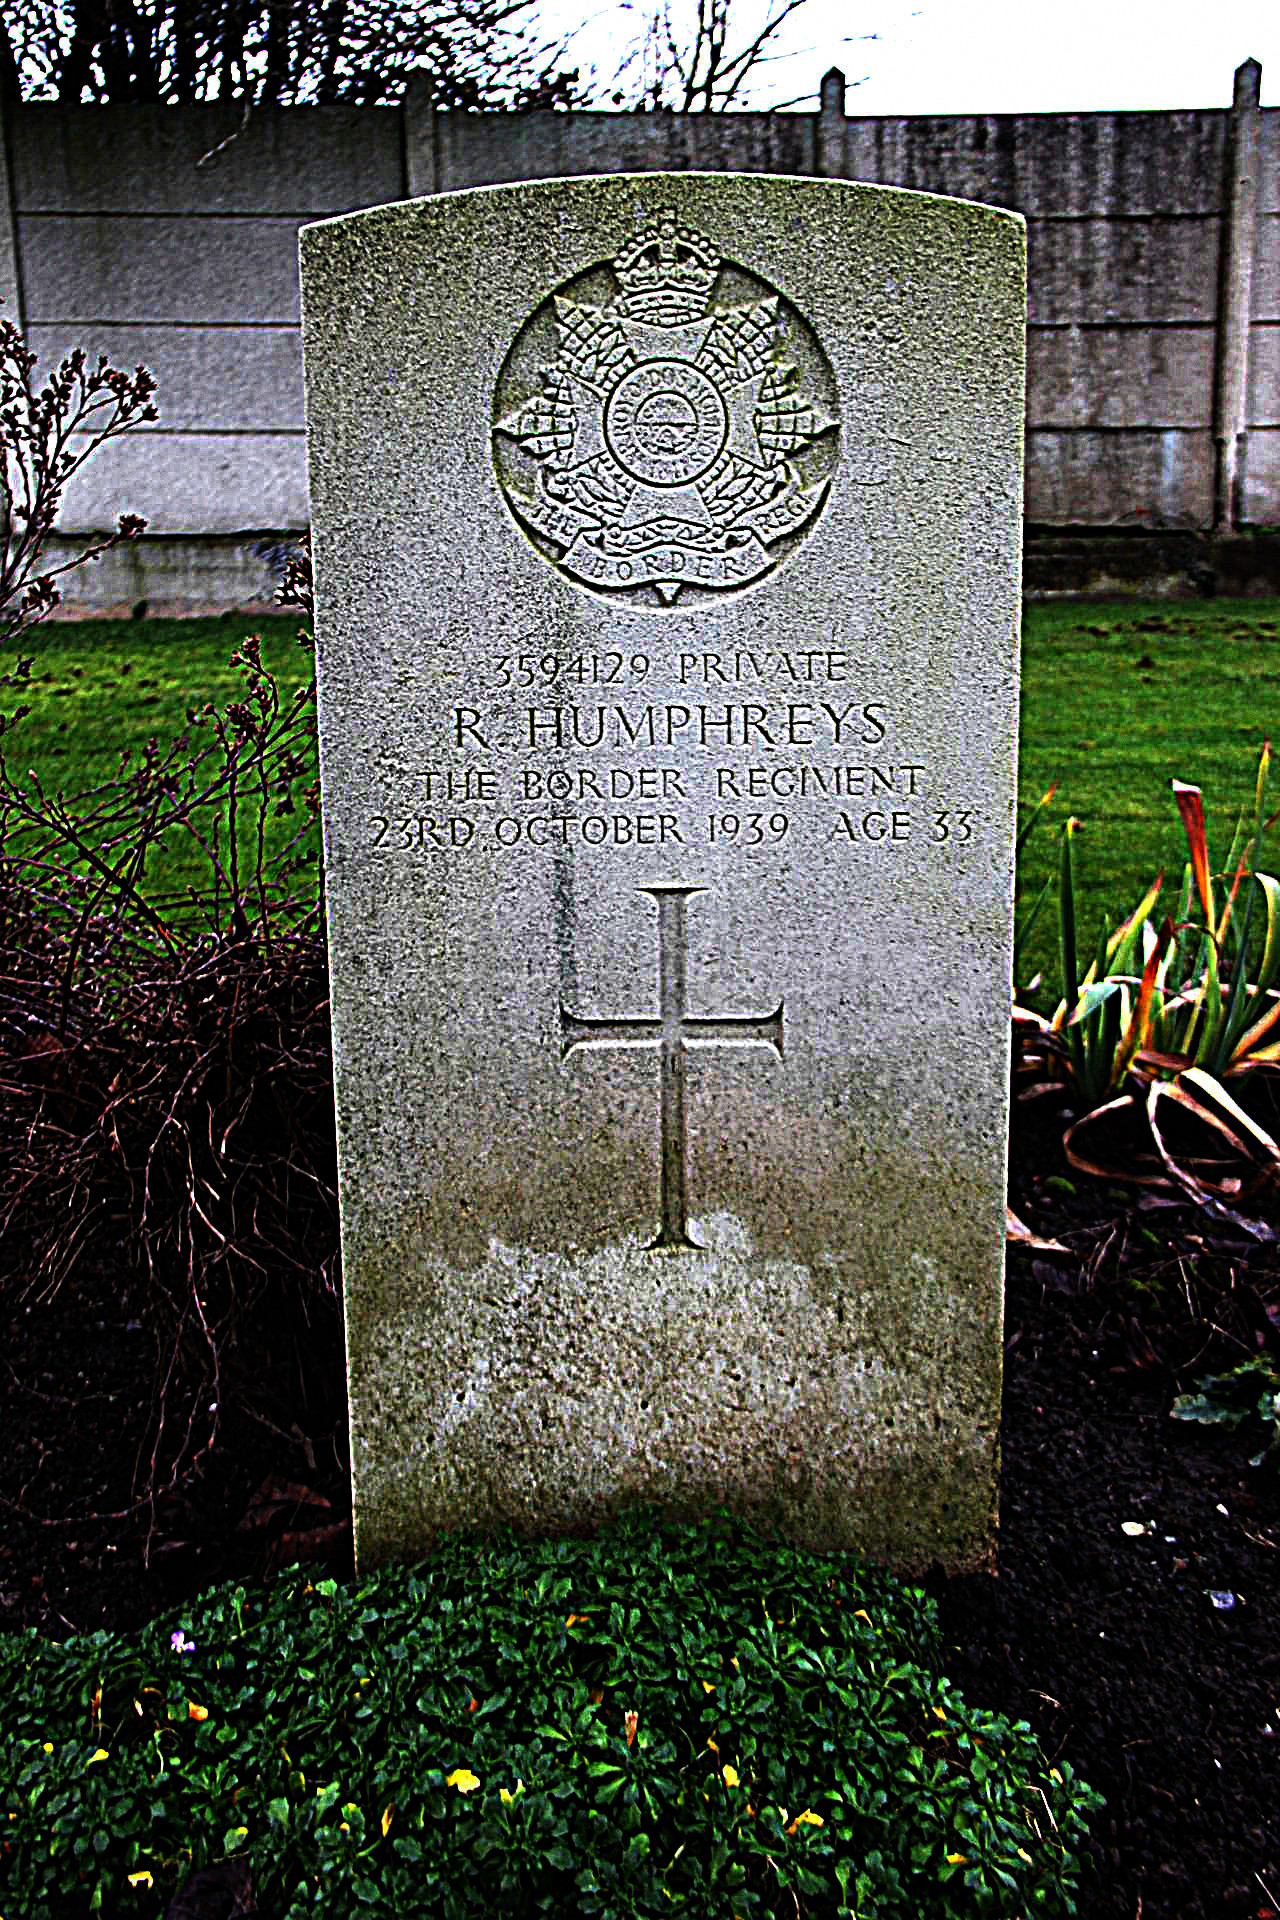 3594129 PRIVATE R. HUMPHREYS THE BORDER REGIMENT 23RD OCTOBER AGE 33